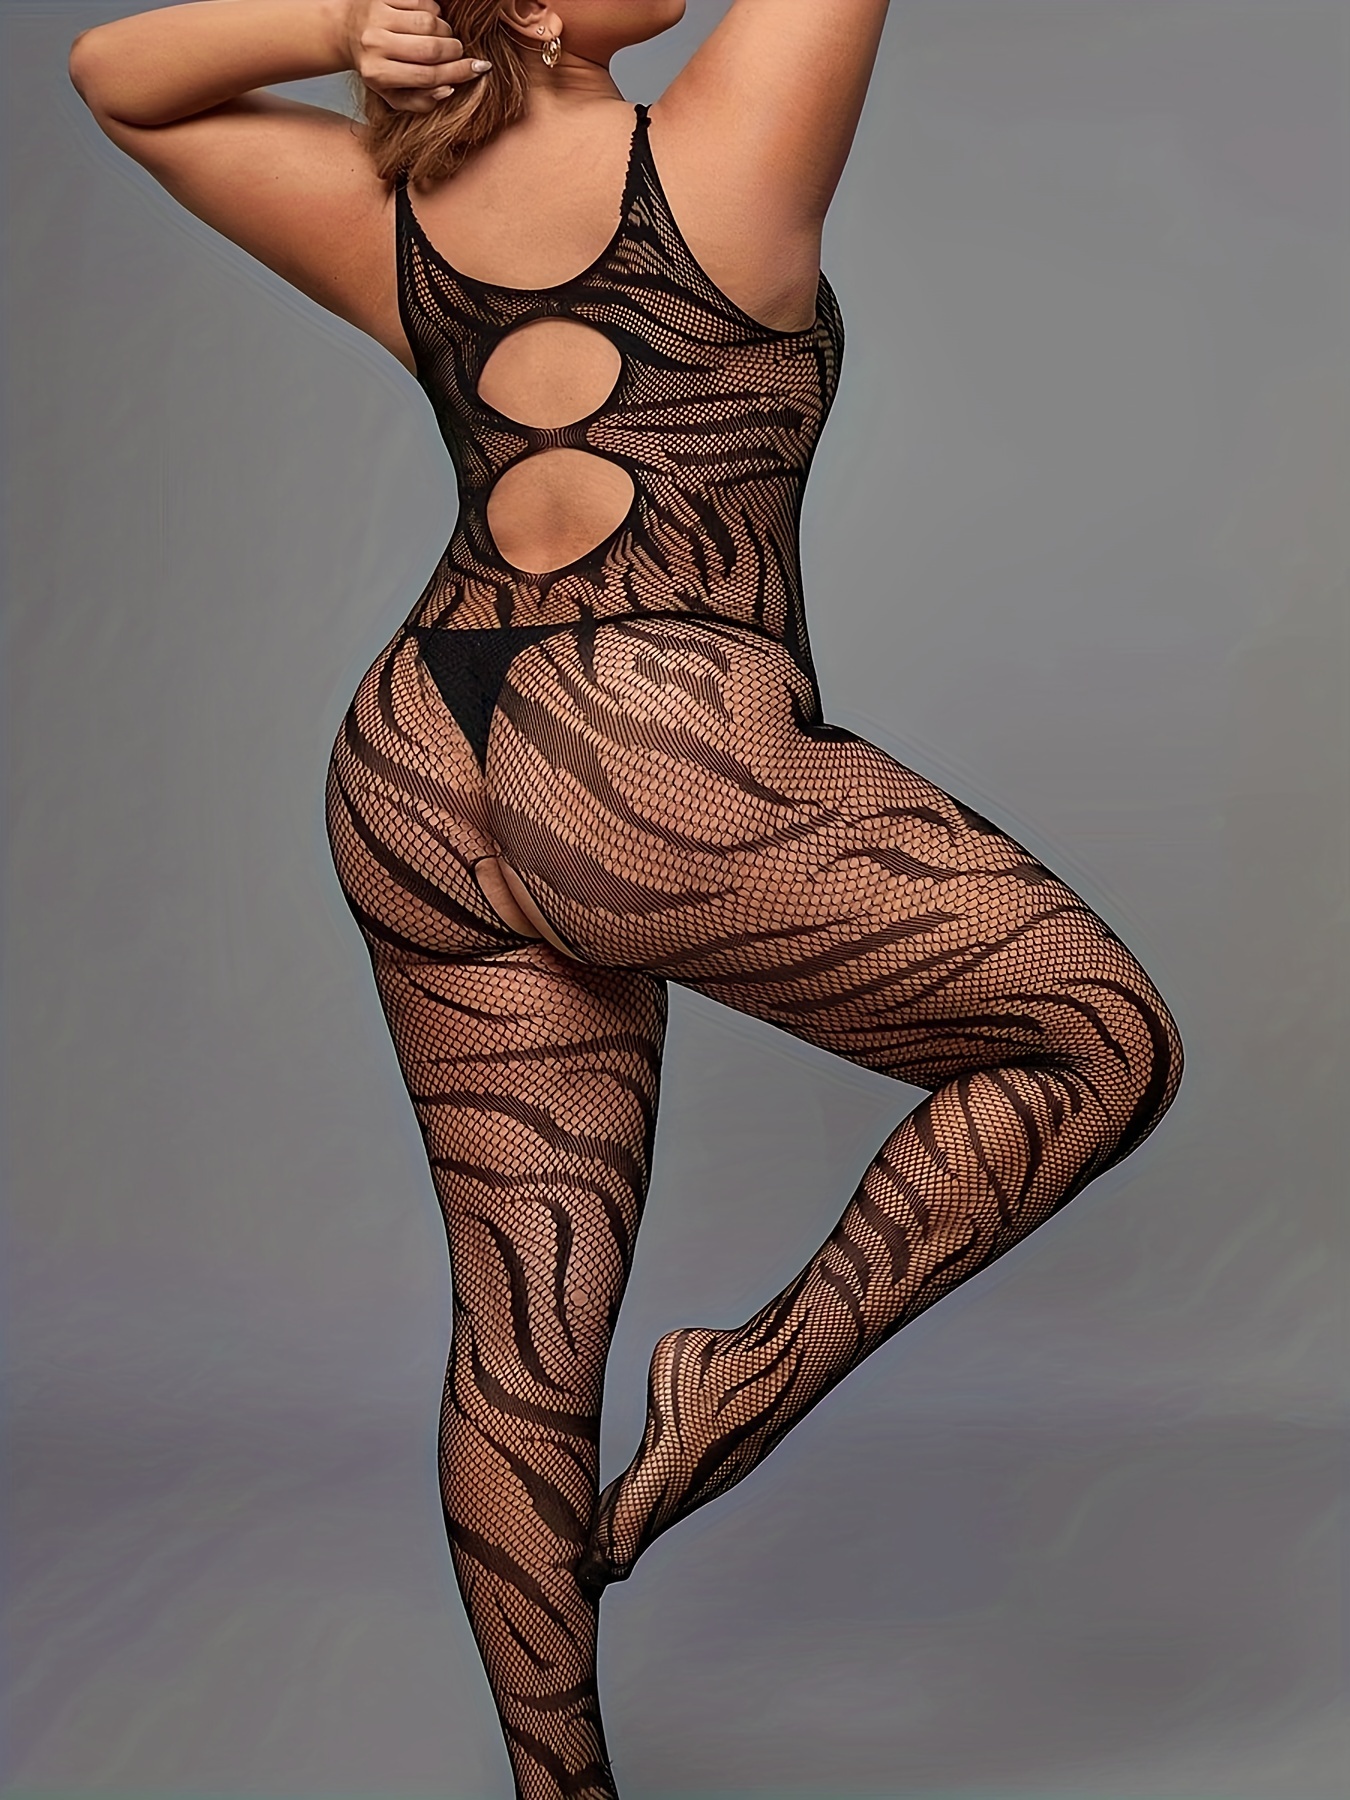 Plus Size Sexy Lingerie Bodystockings, Women's Plus Cut Out Fishnet  Crotchless Bodysuit Without Liner